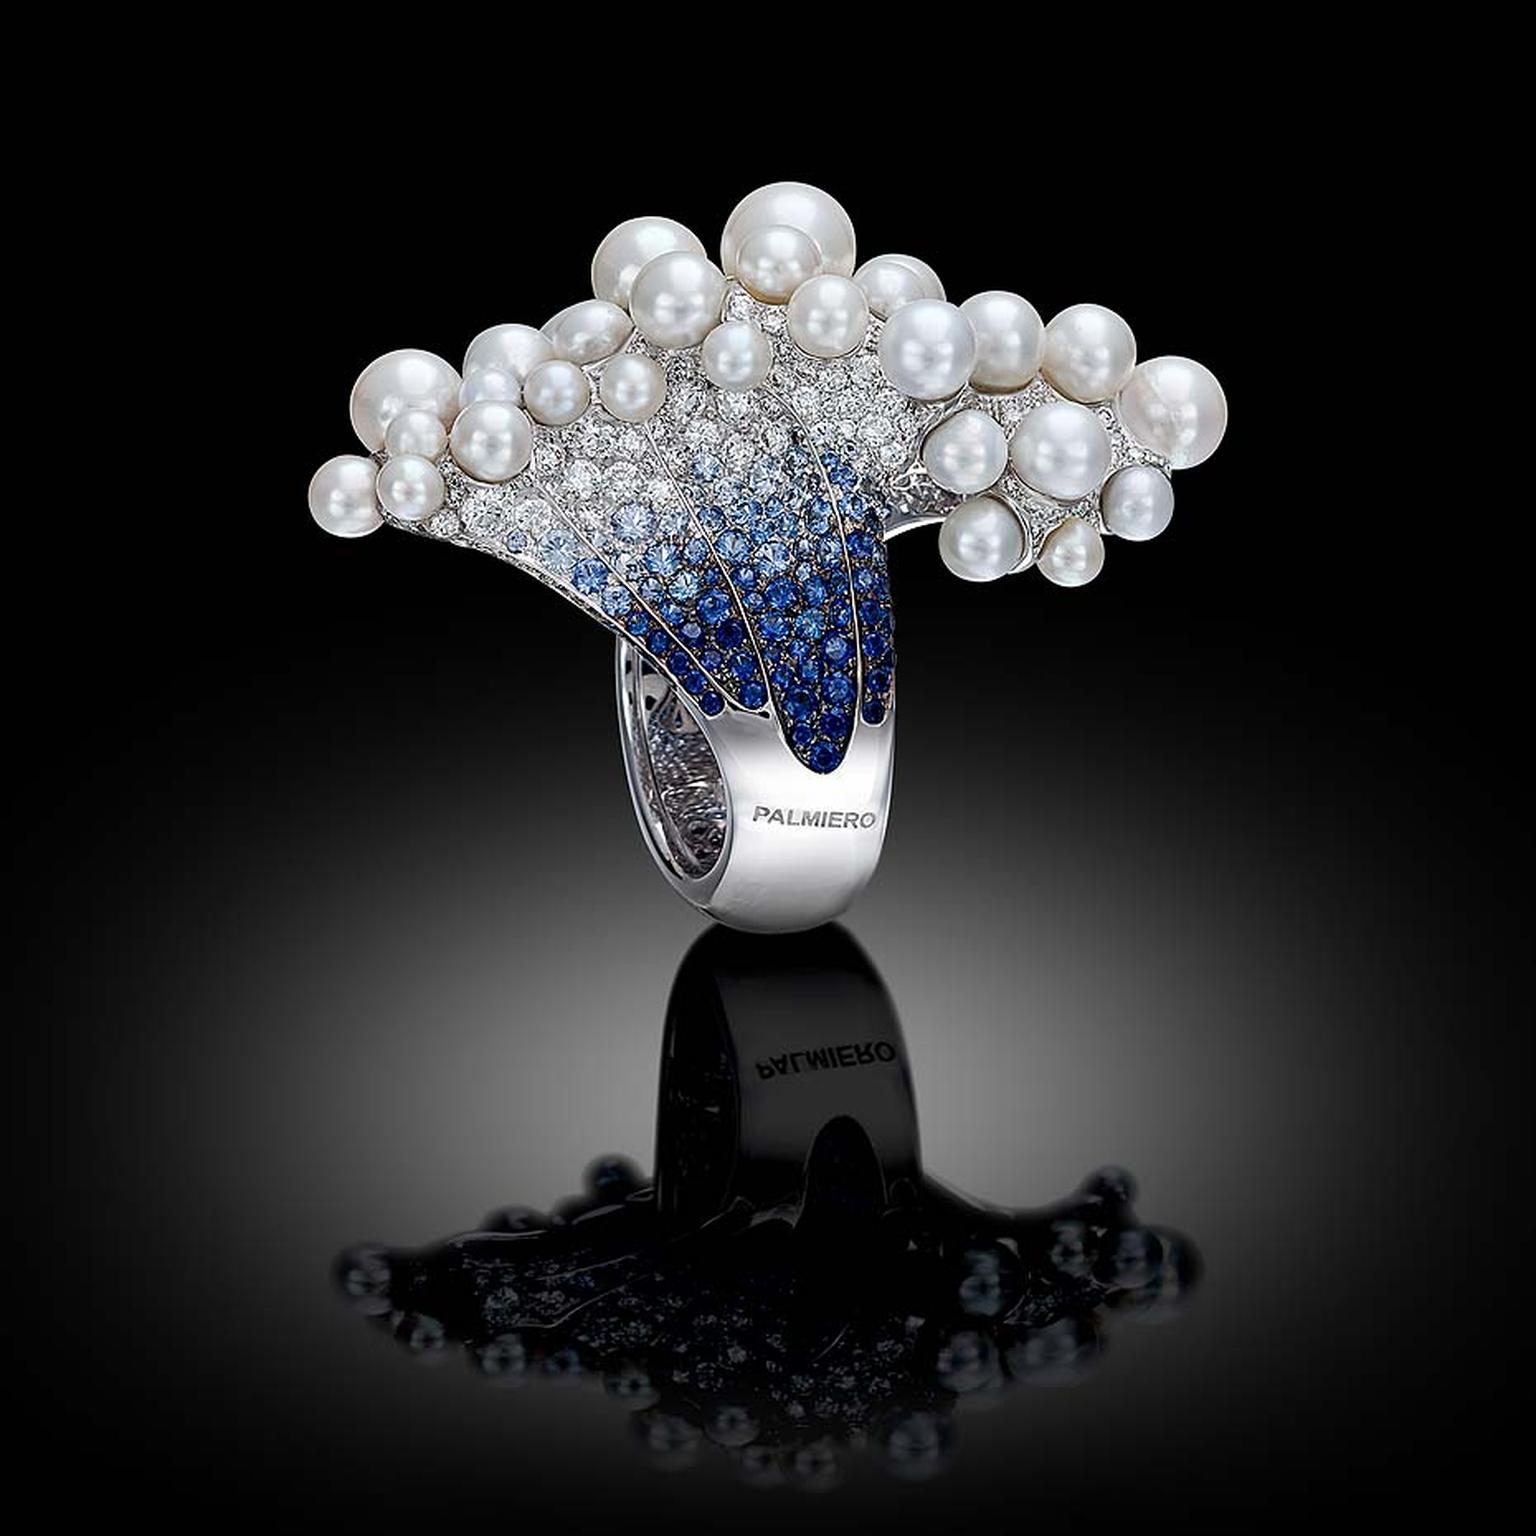 Palmiero ring launched at Baselworld 2015, inspired by the underwater world, set with graduated blue sapphires and topped with a foam of bubbling pearls.